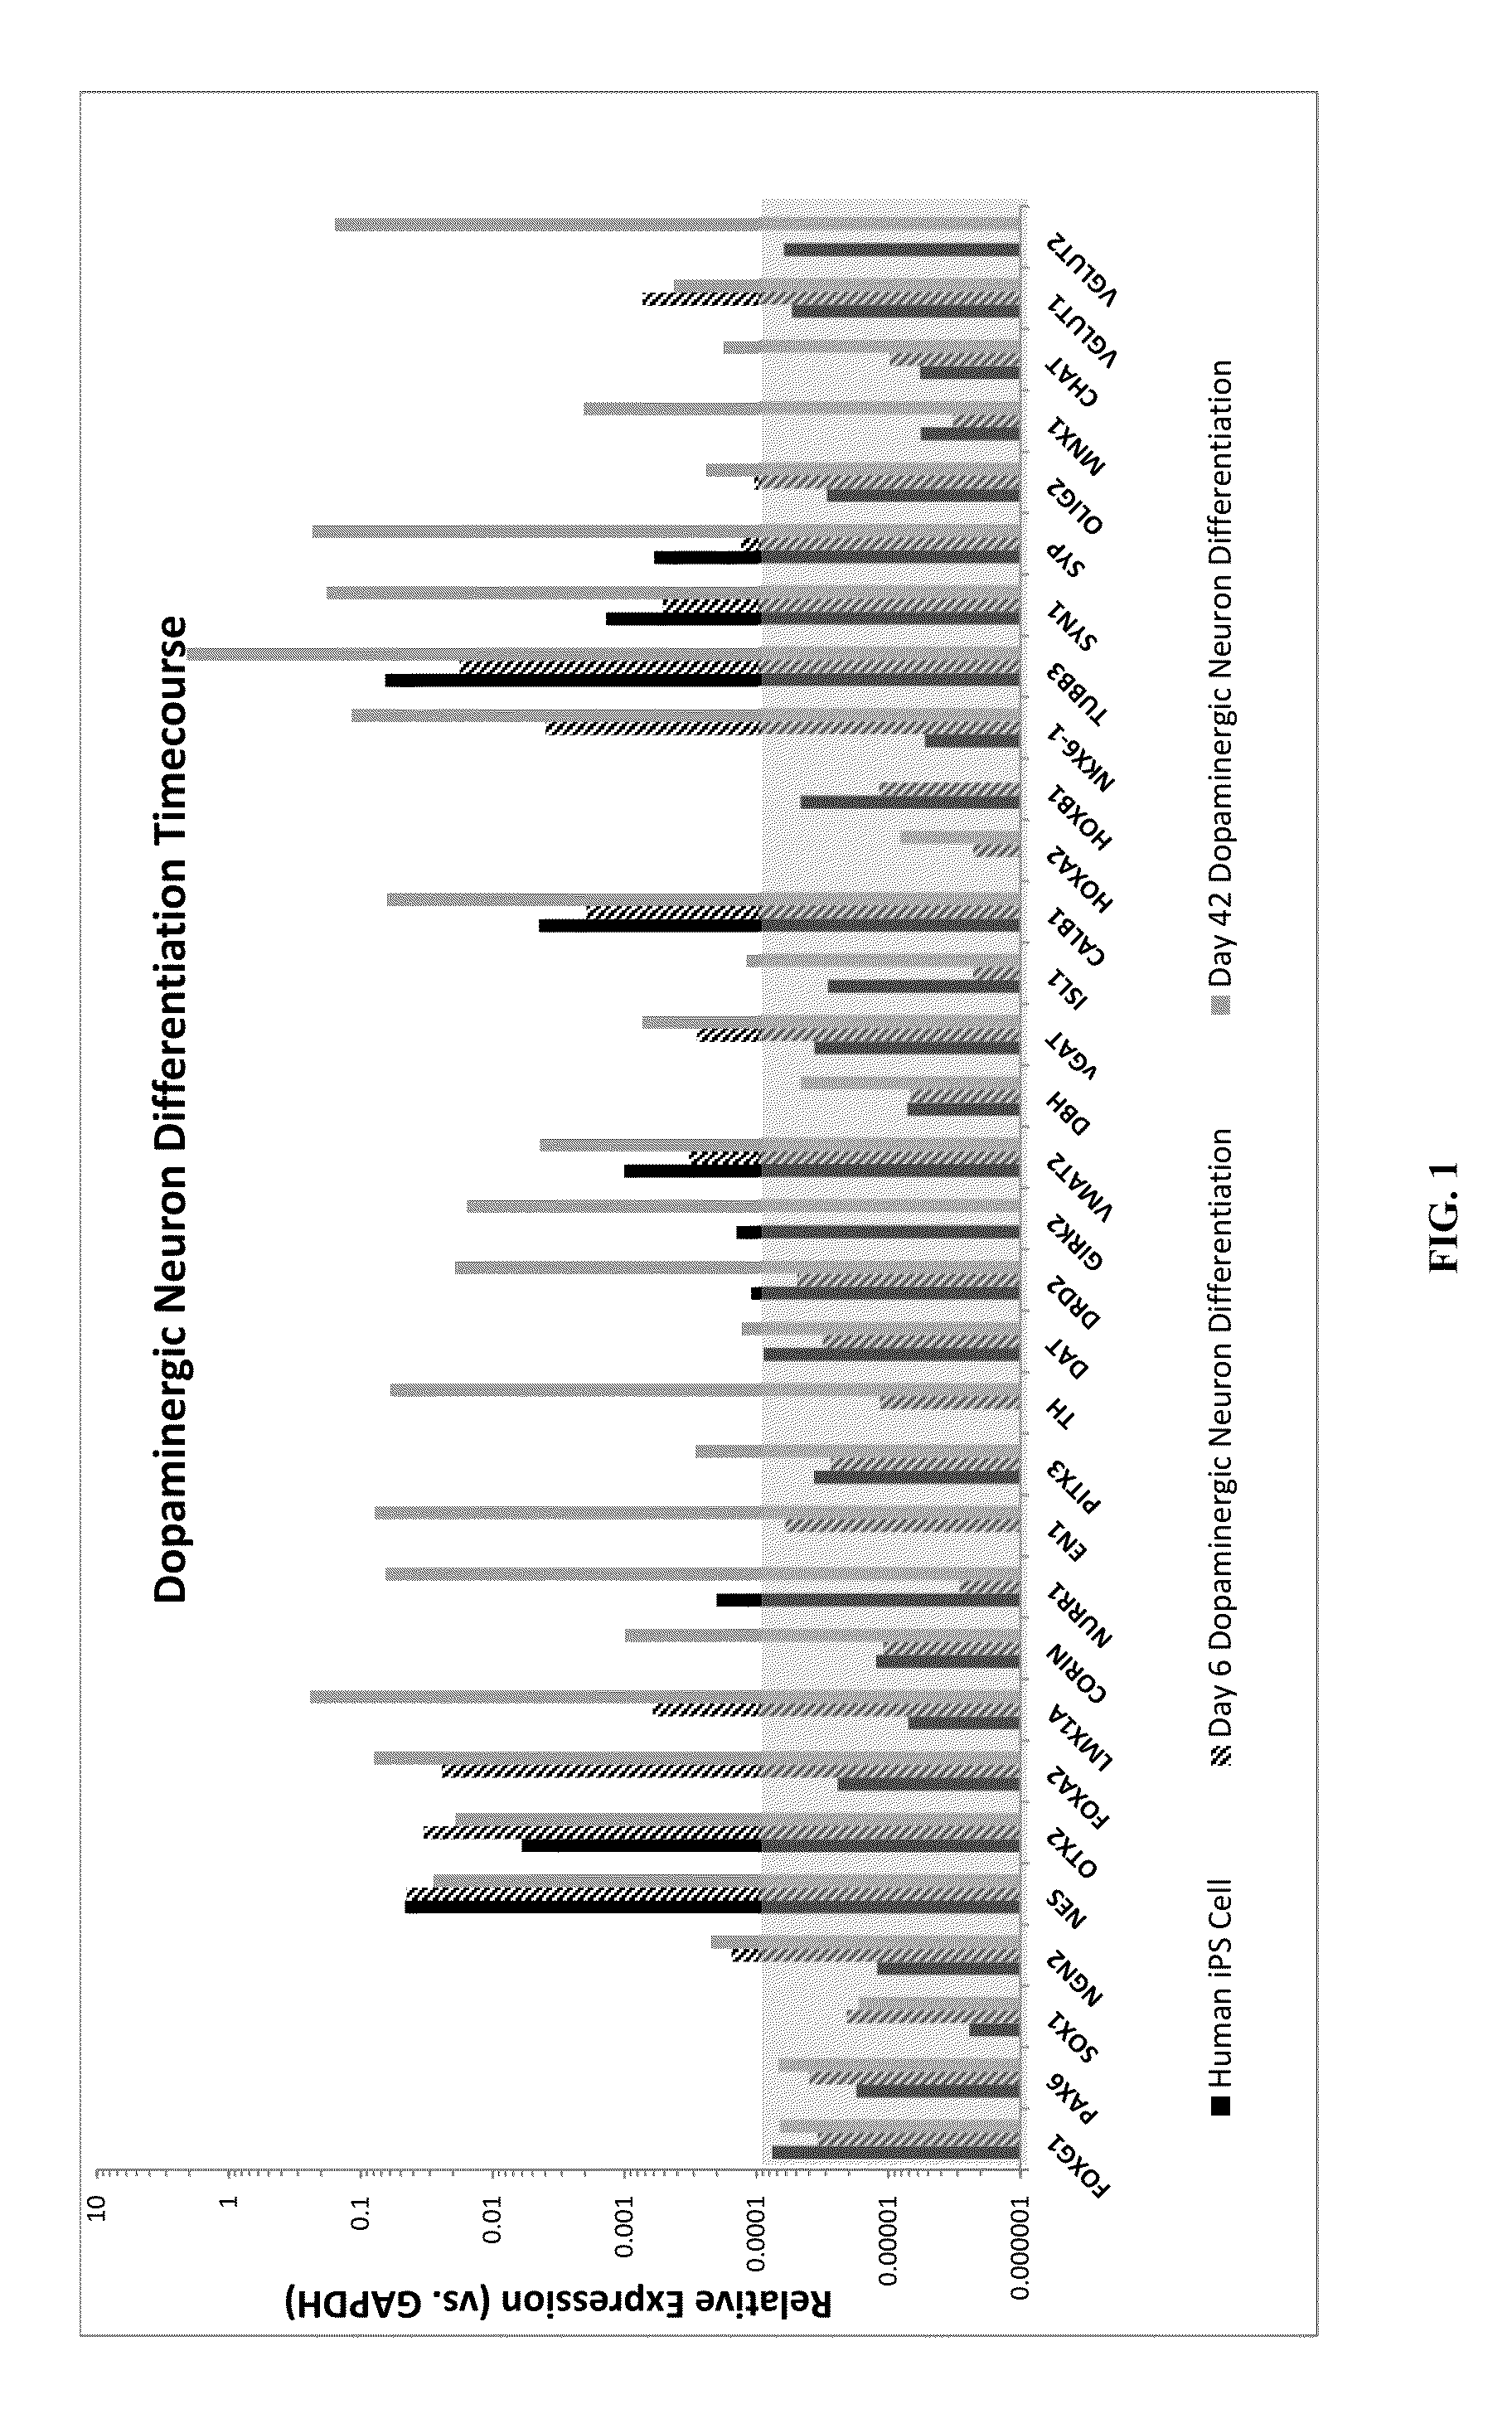 Production of midbrain dopaminergic neurons and methods for the use thereof